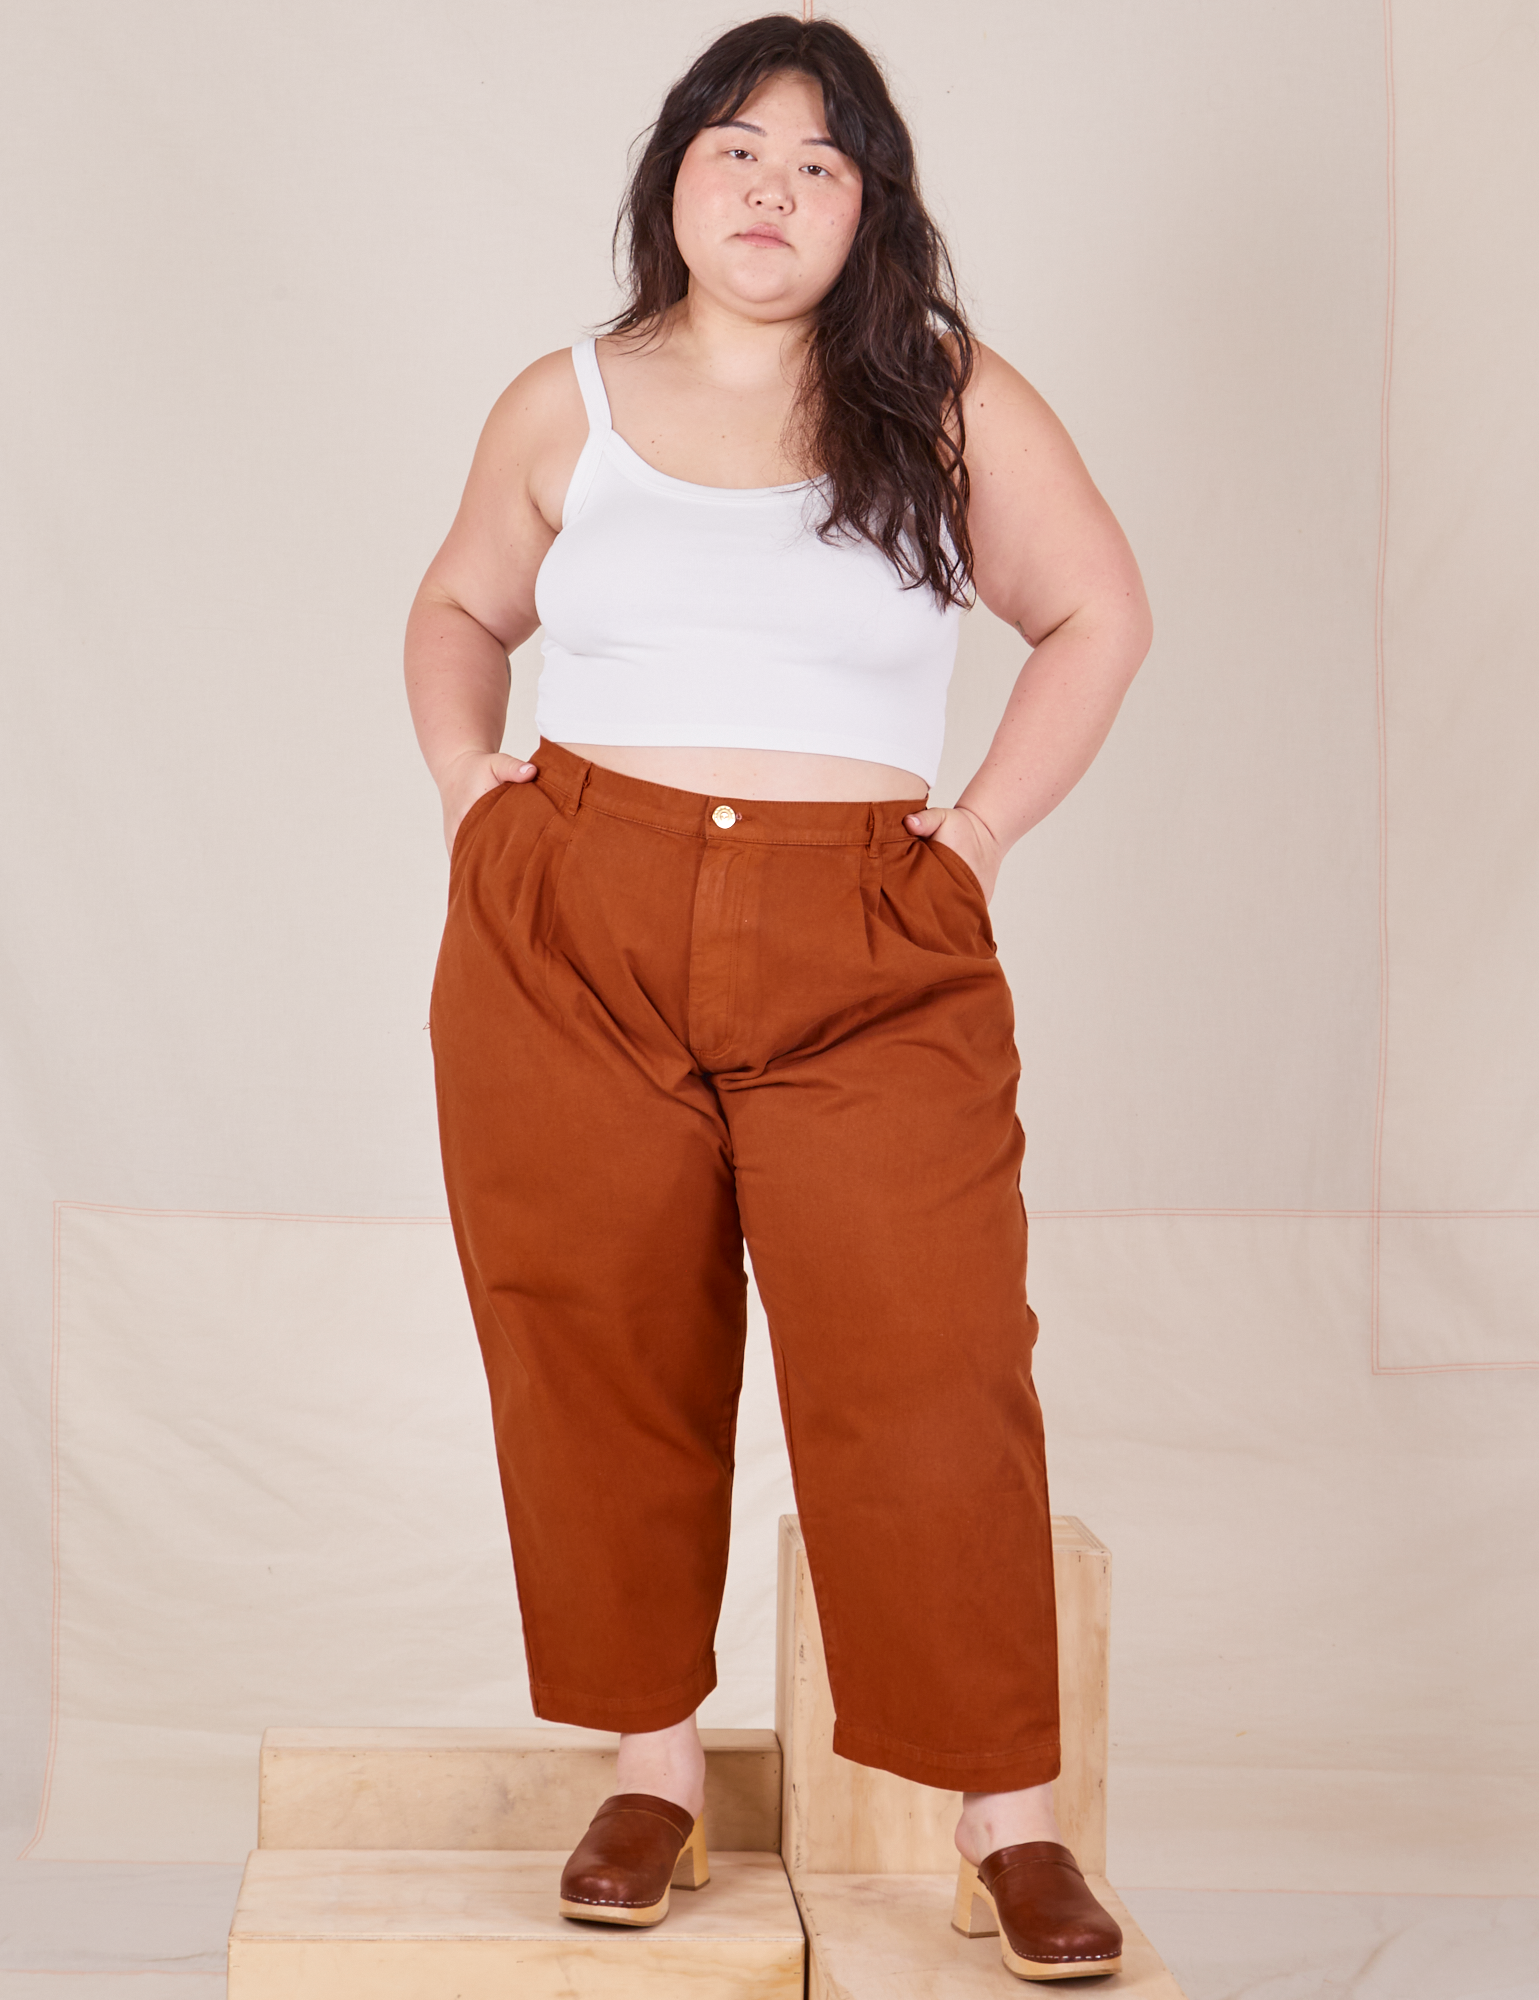 Ashley is 5&#39;7&quot; and wearing 1XL Petite Heavyweight Trousers in Burnt Terracotta paired with vintage off-white Cropped Cami